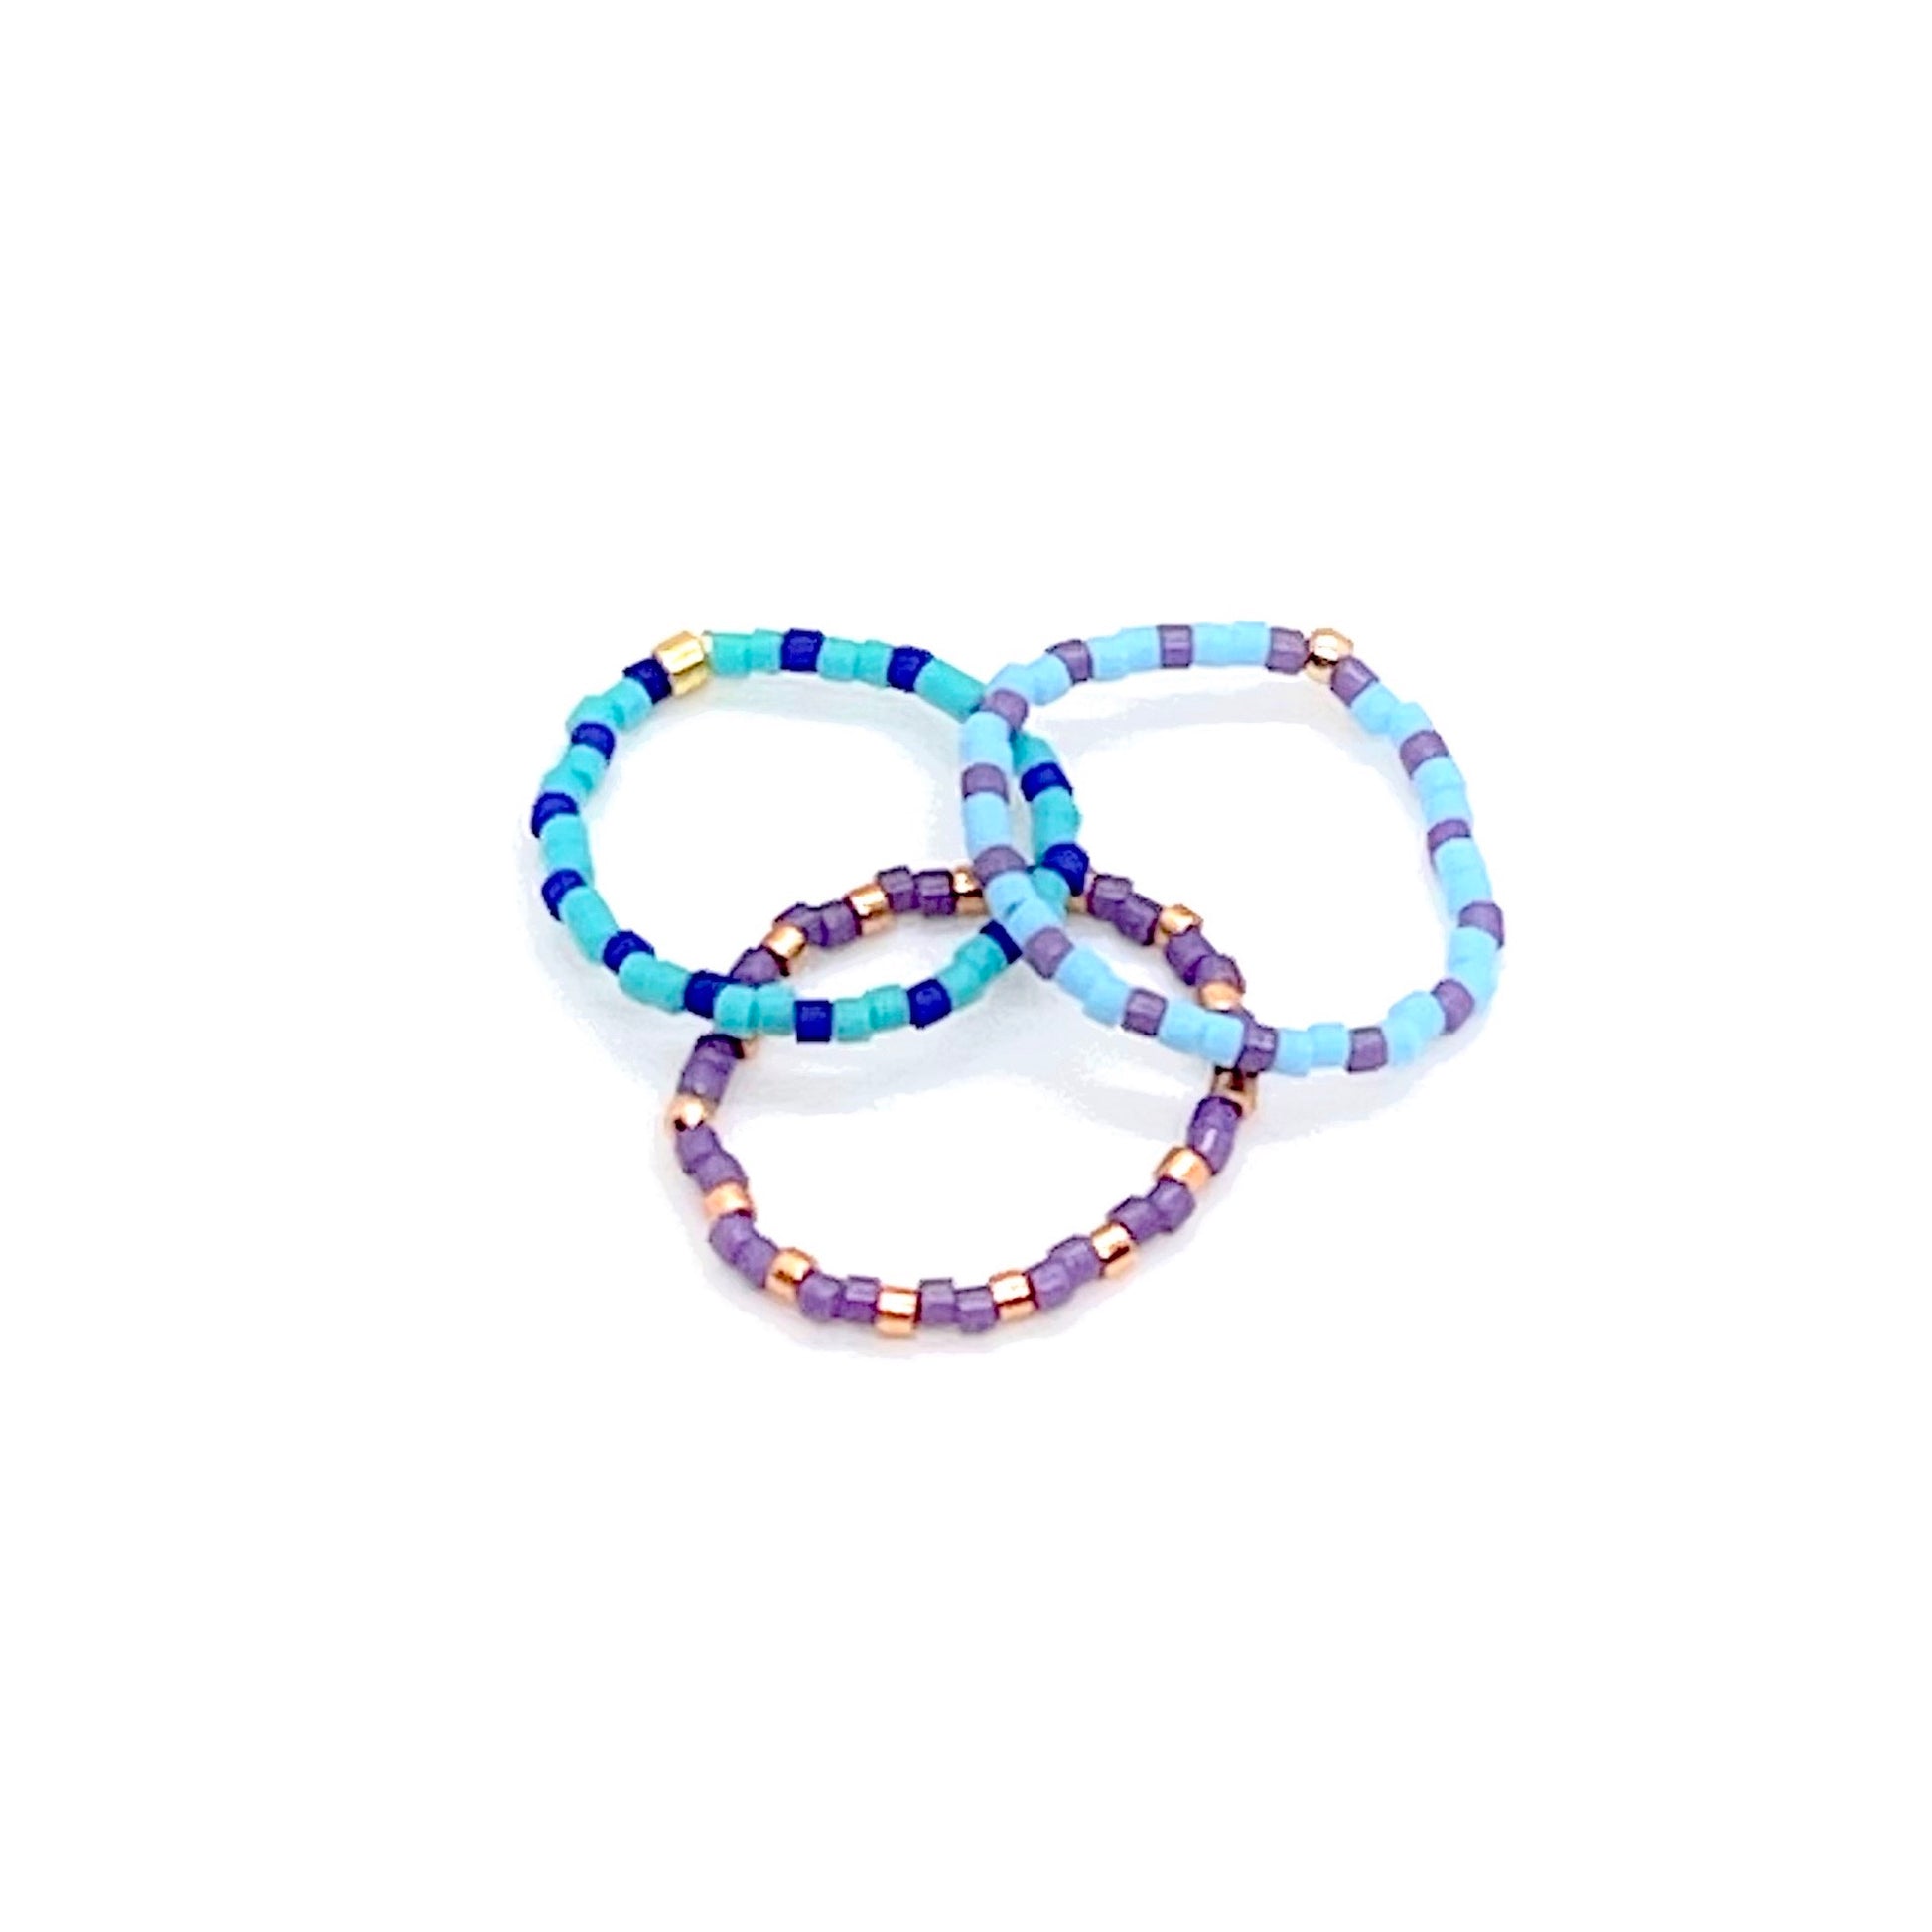 Beaded stretch ring set of 3 with metal-tone, and alternating purple, turquoise, and cobalt blue Miyuki Delica seed beads.